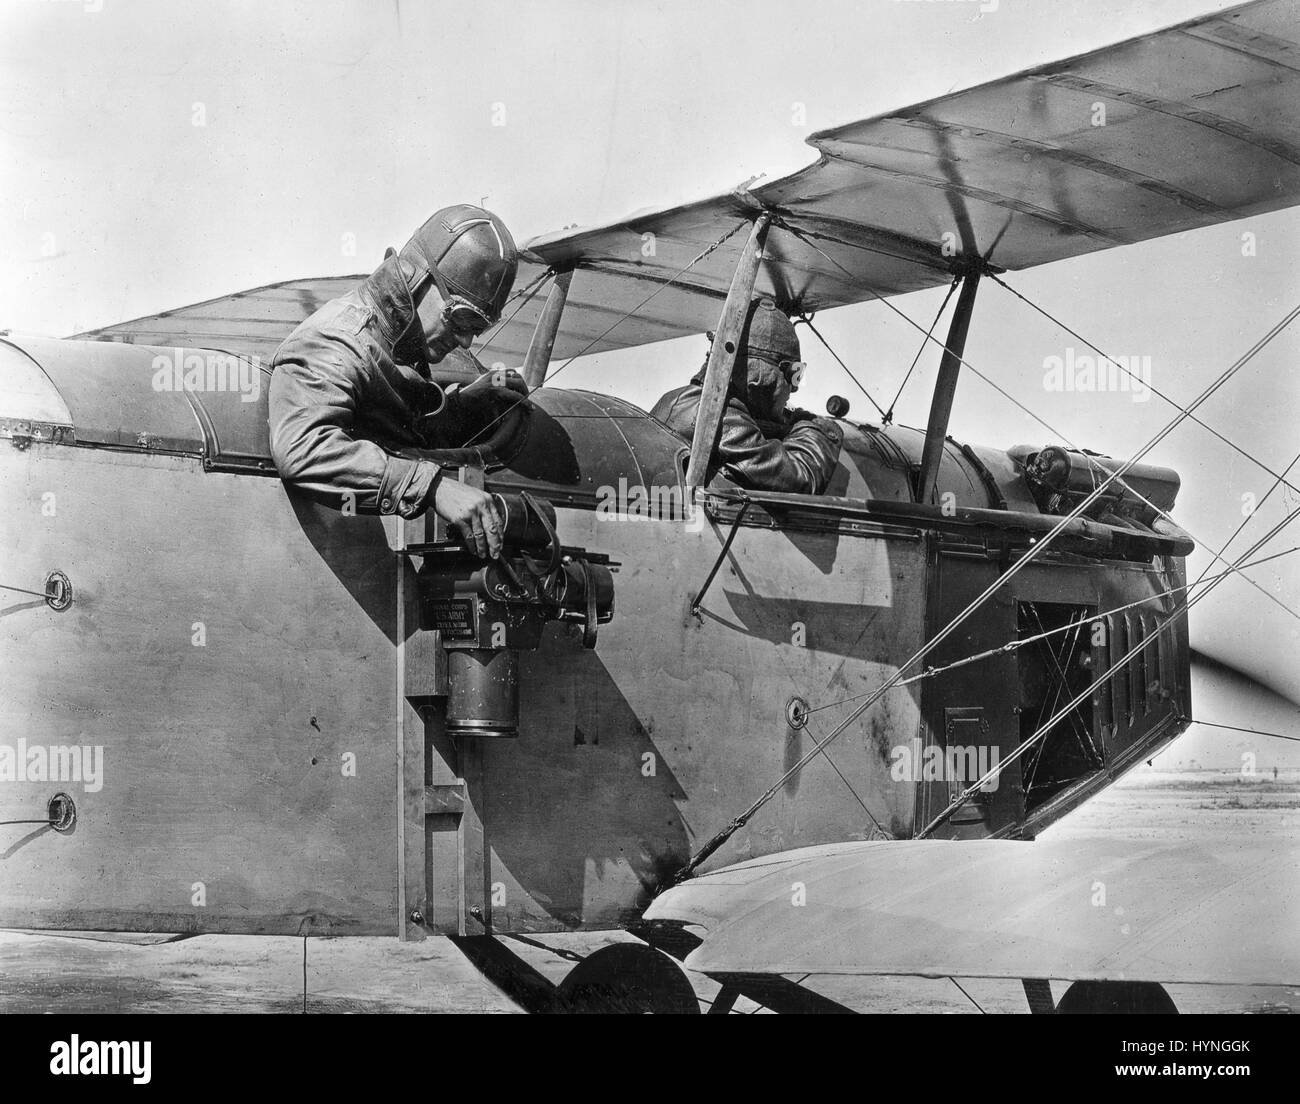 Photo shows a camera mounted on the side of a 1919 US Army plane. The first aerial cameras were modifications of existing plate cameras and were used for military reconnaissance and mapping during World War I. 1919. Stock Photo